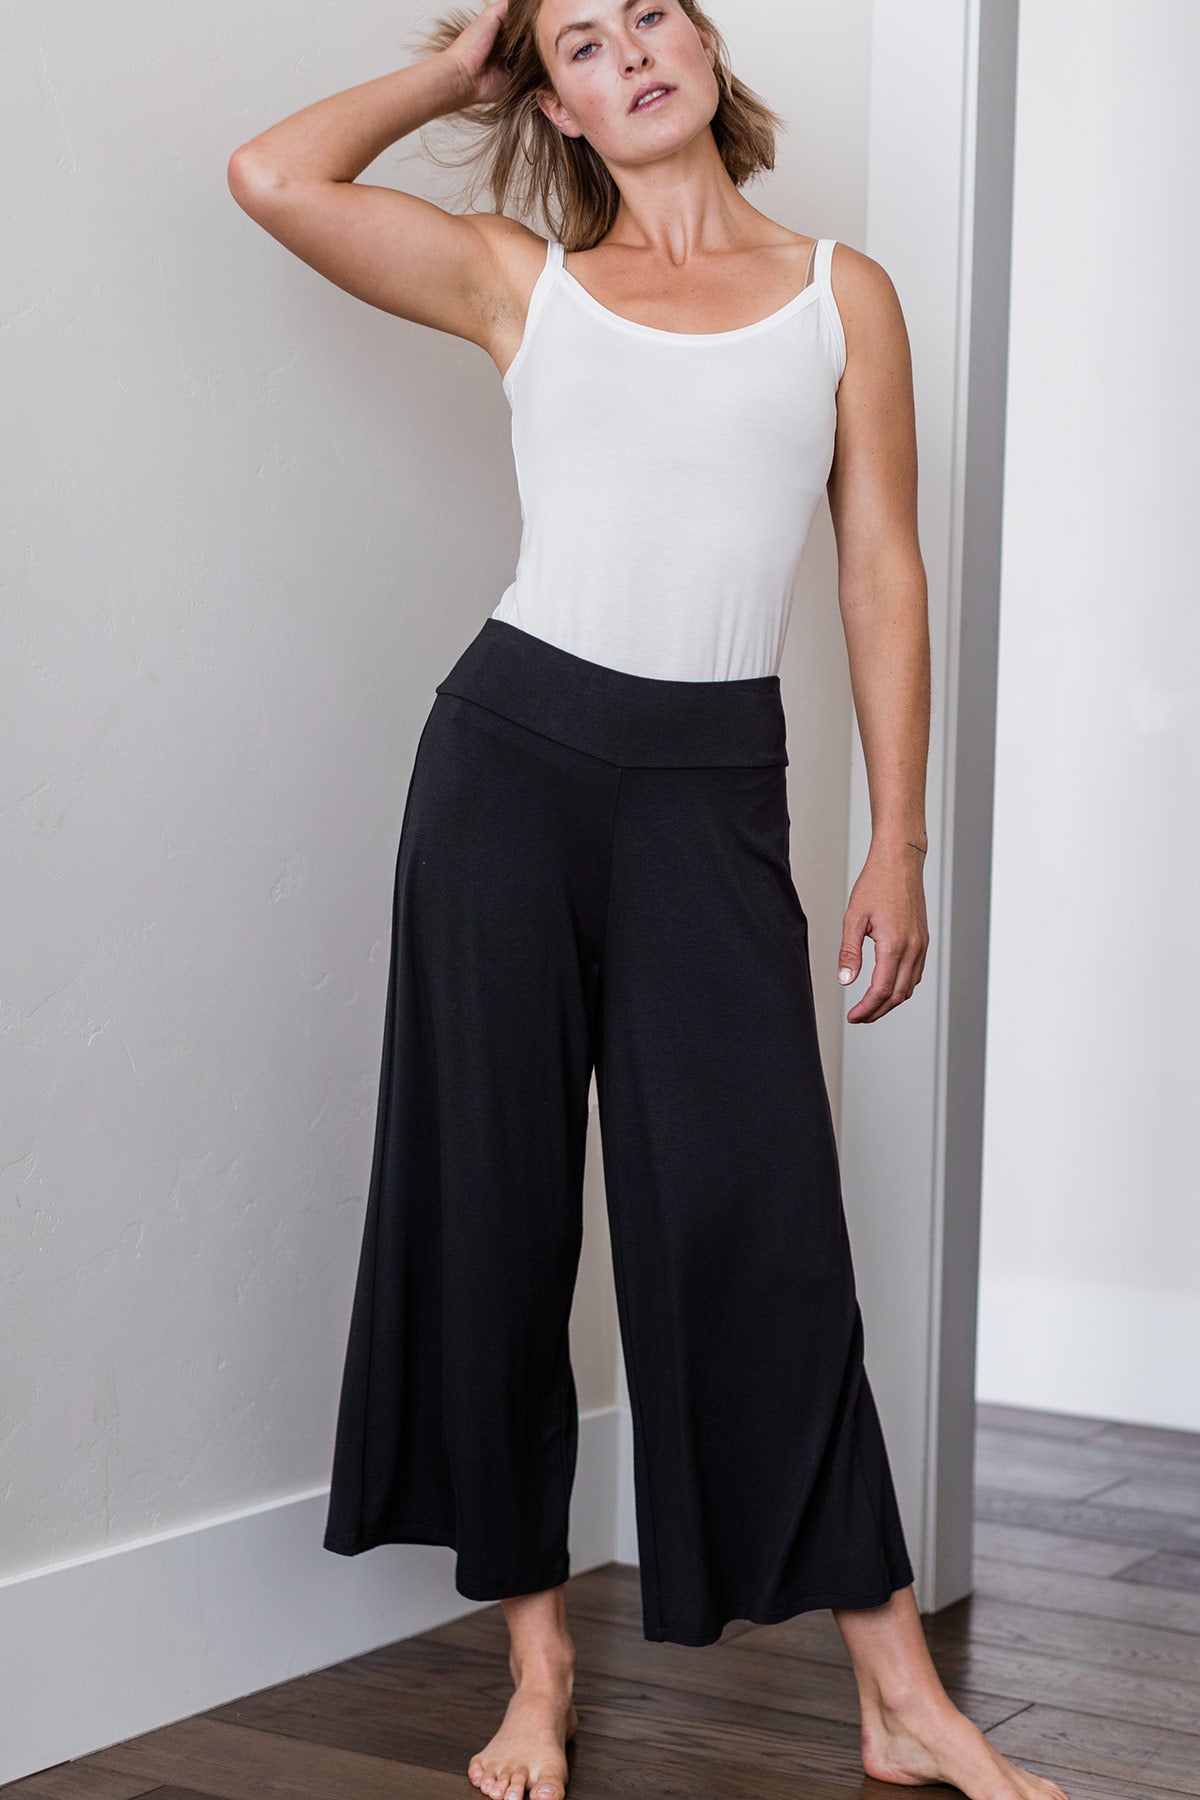 A woman standing with one leg outstretched and one hand in her hair, wearing Yala Jaden Wide Leg Cropped Bamboo Pants in Black